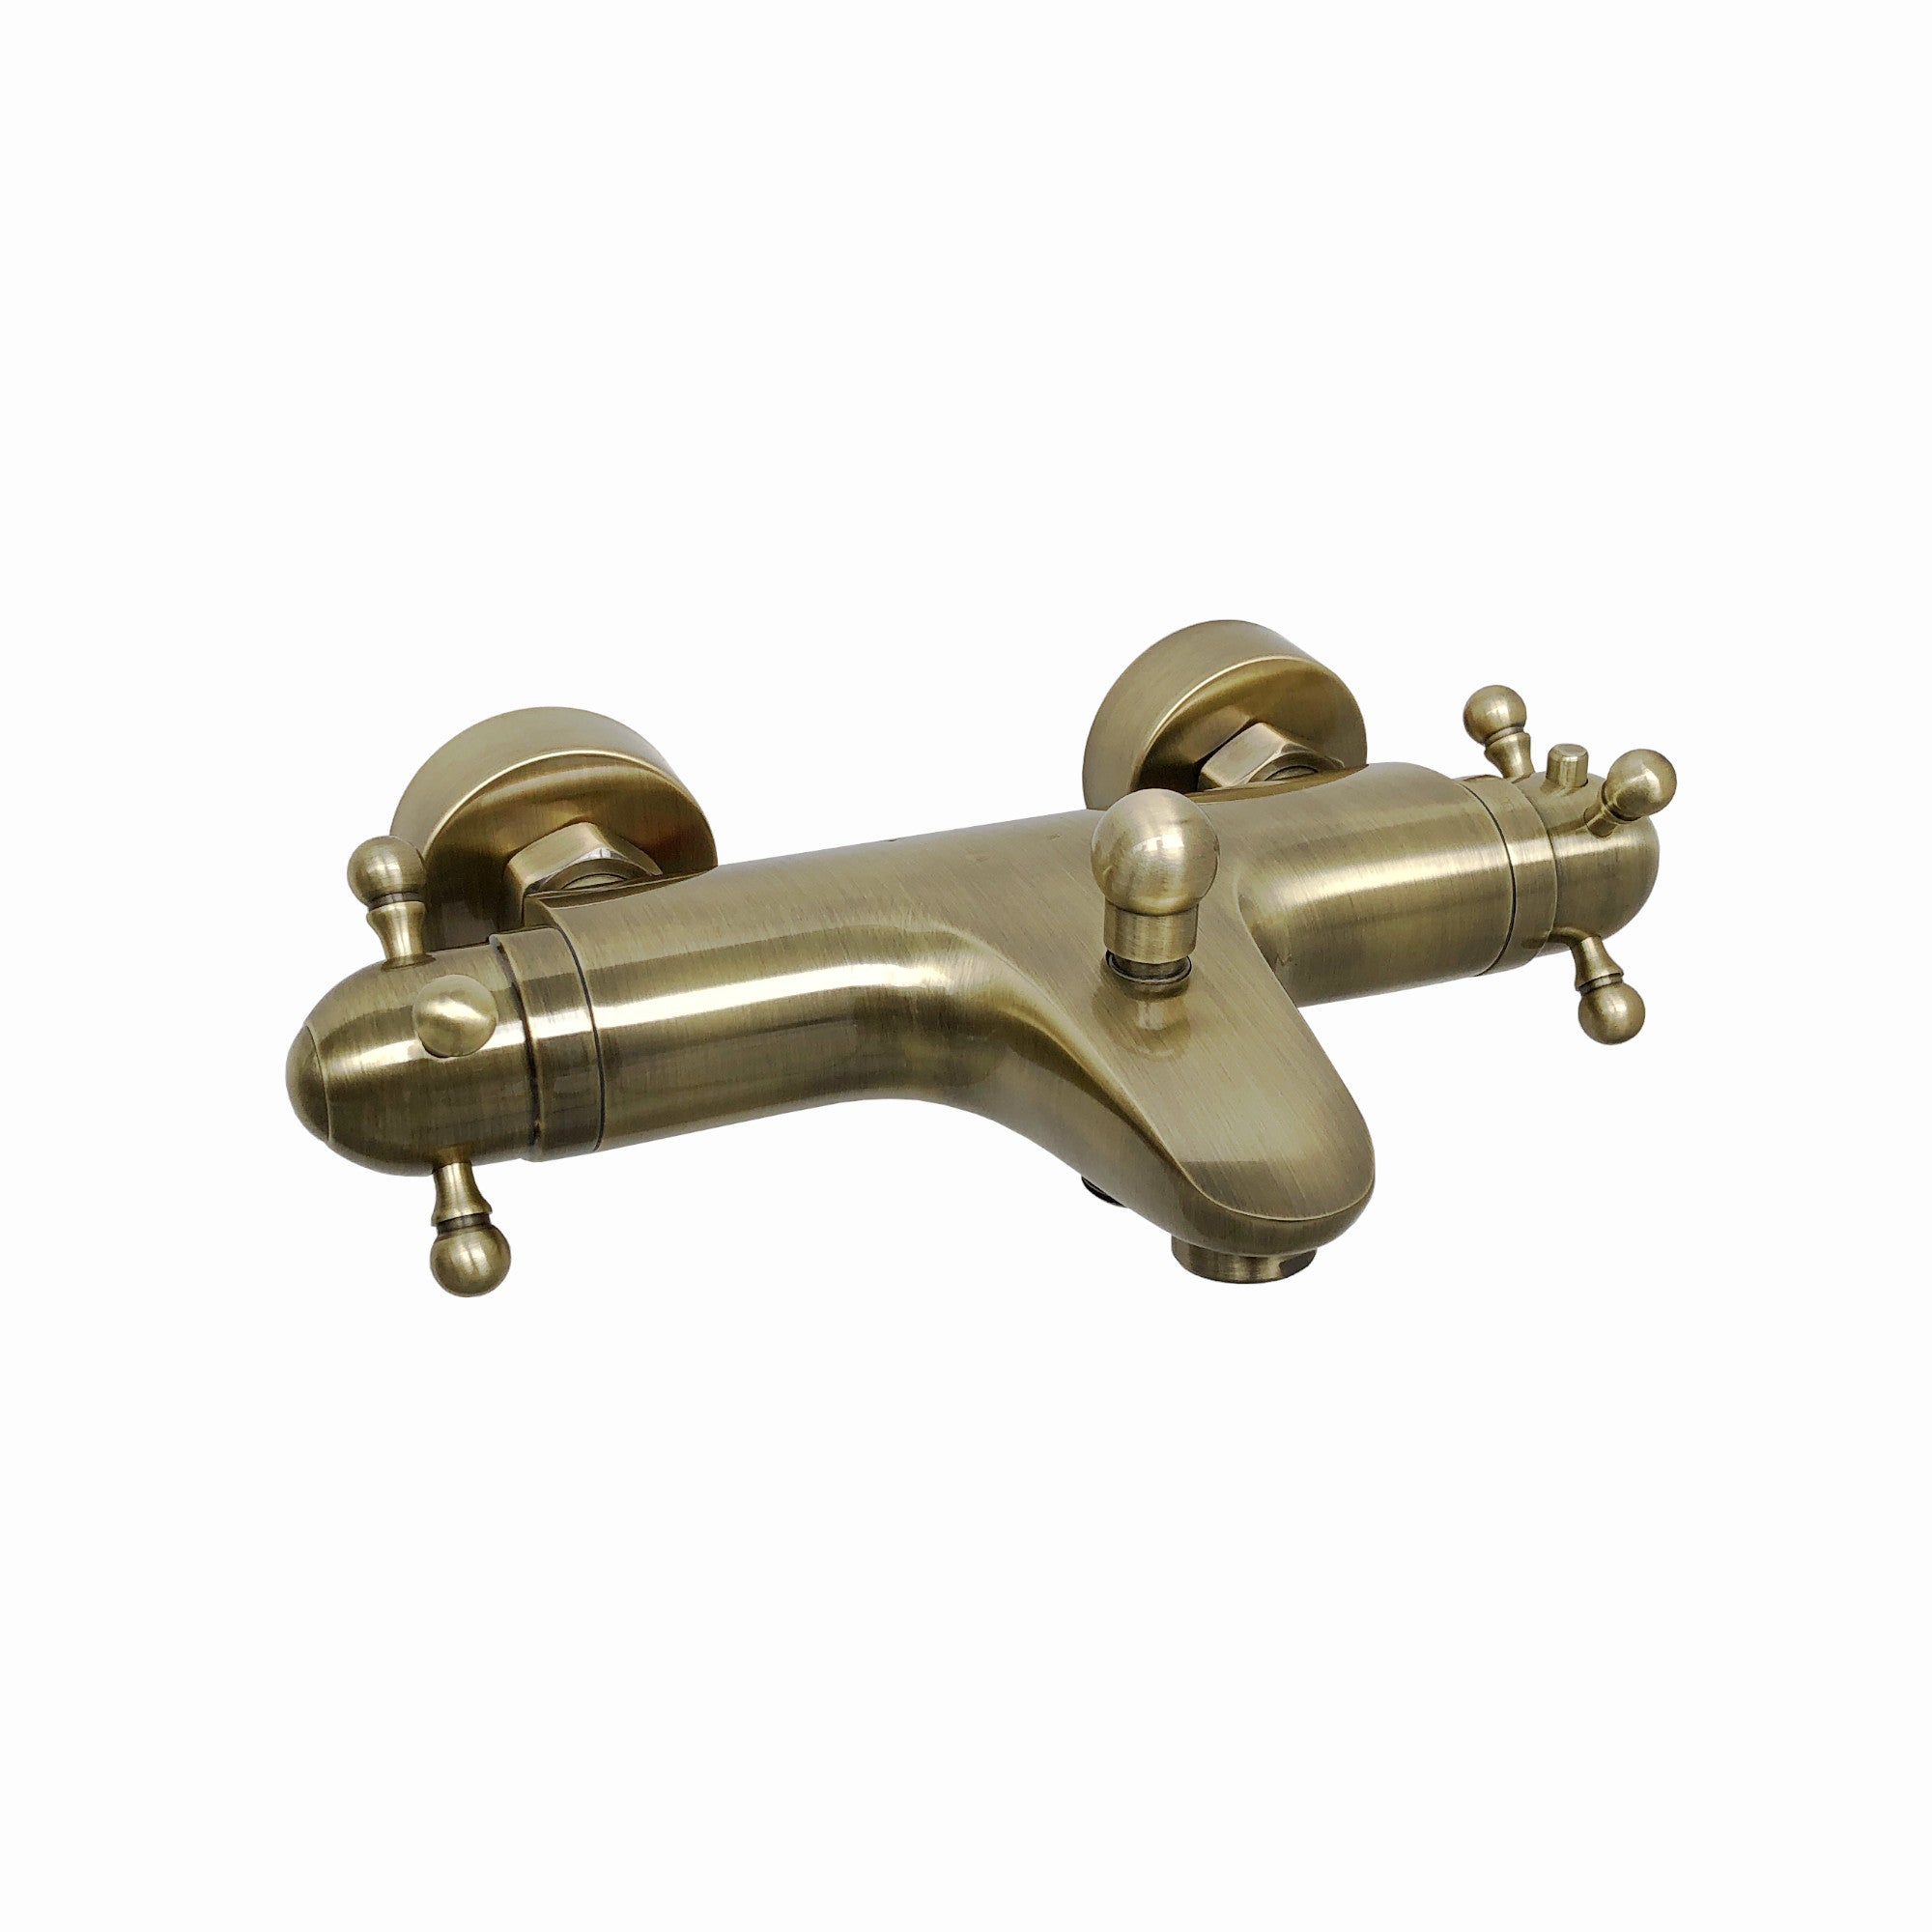 Gallant traditional thermostatic bath shower mixer tap wall mounted - antique bronze